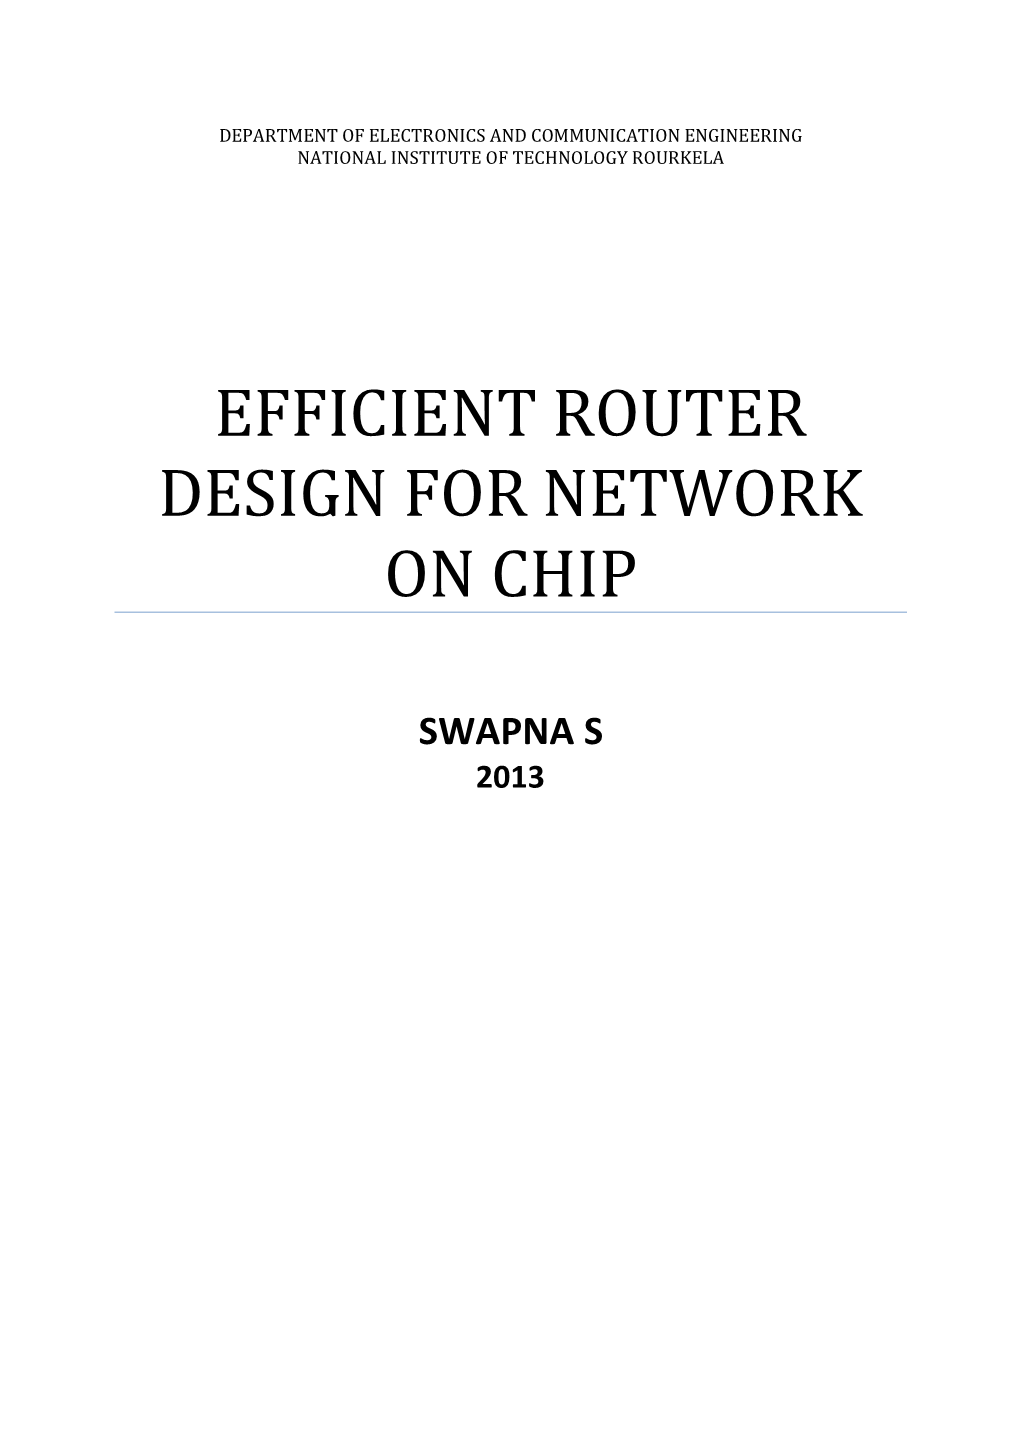 Efficient Router Design for Network on Chip